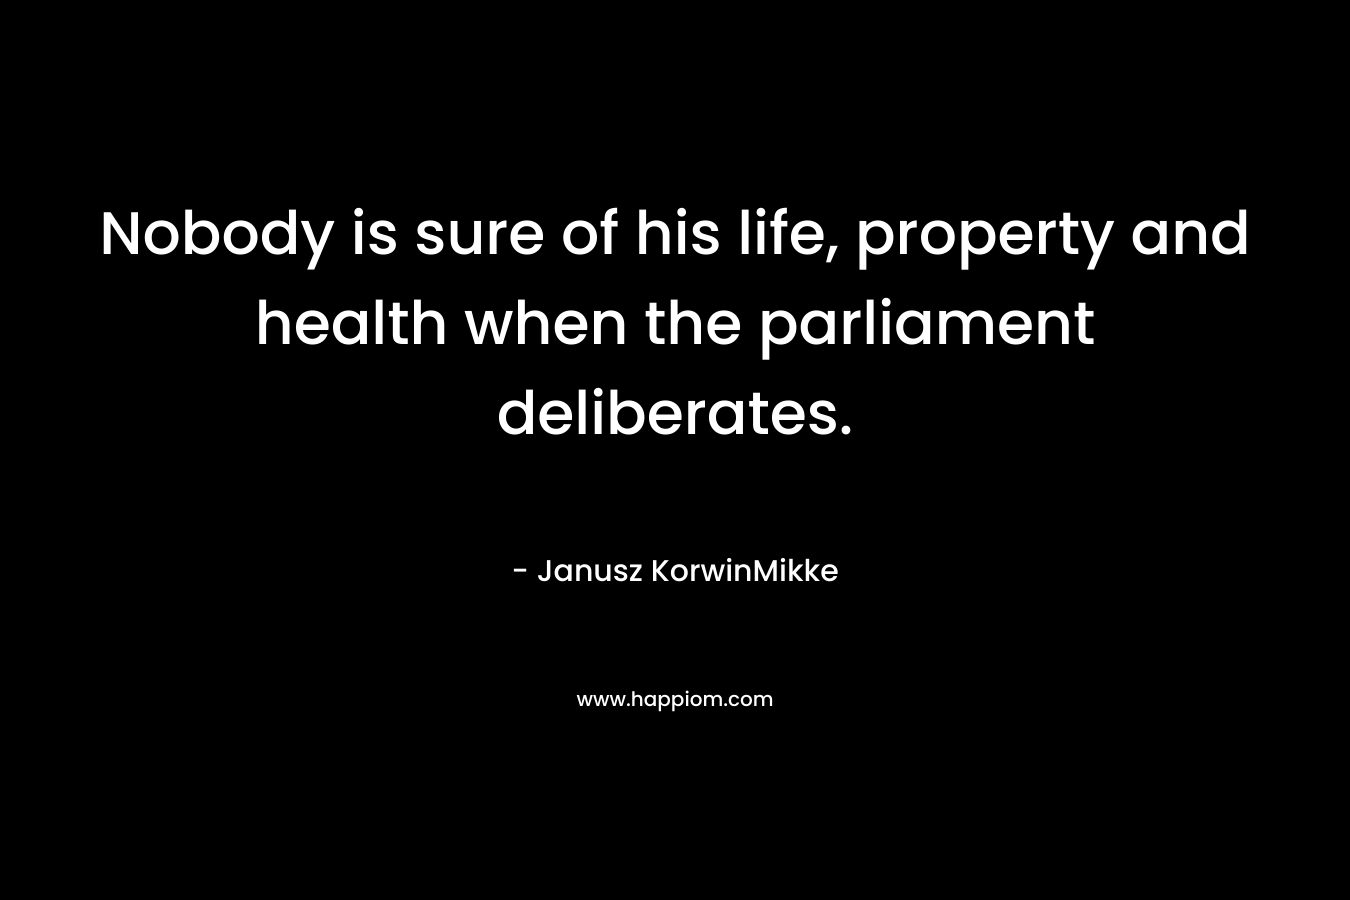 Nobody is sure of his life, property and health when the parliament deliberates.